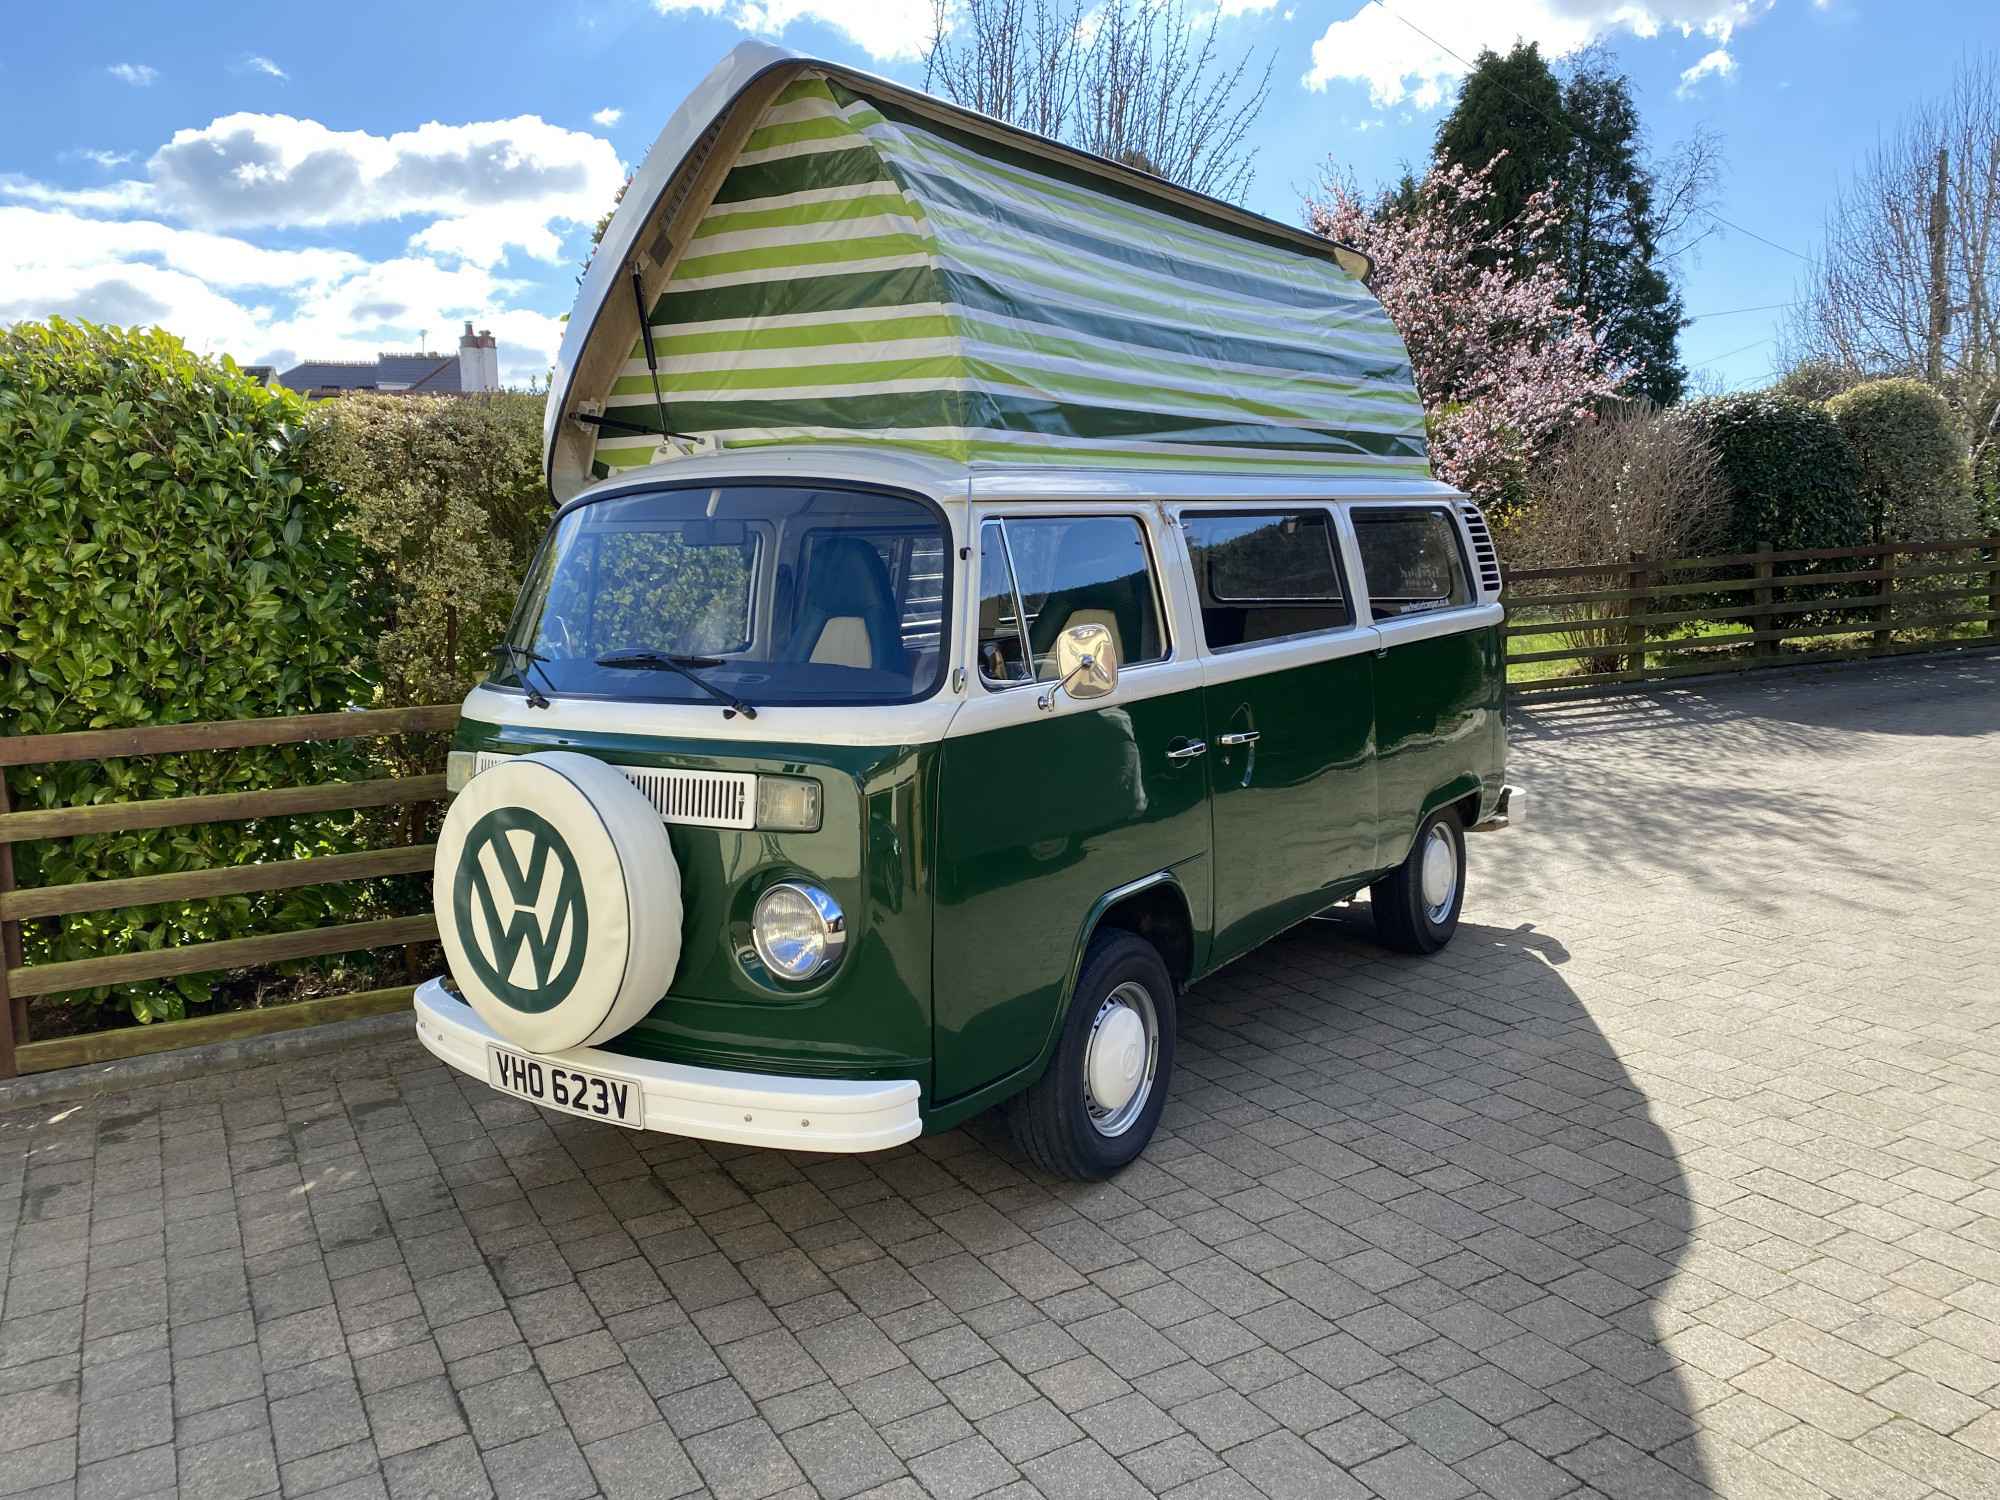 A  Campervan called Wild-Monty and Wild Monty Campervan for hire for hire in Colyford, Devon